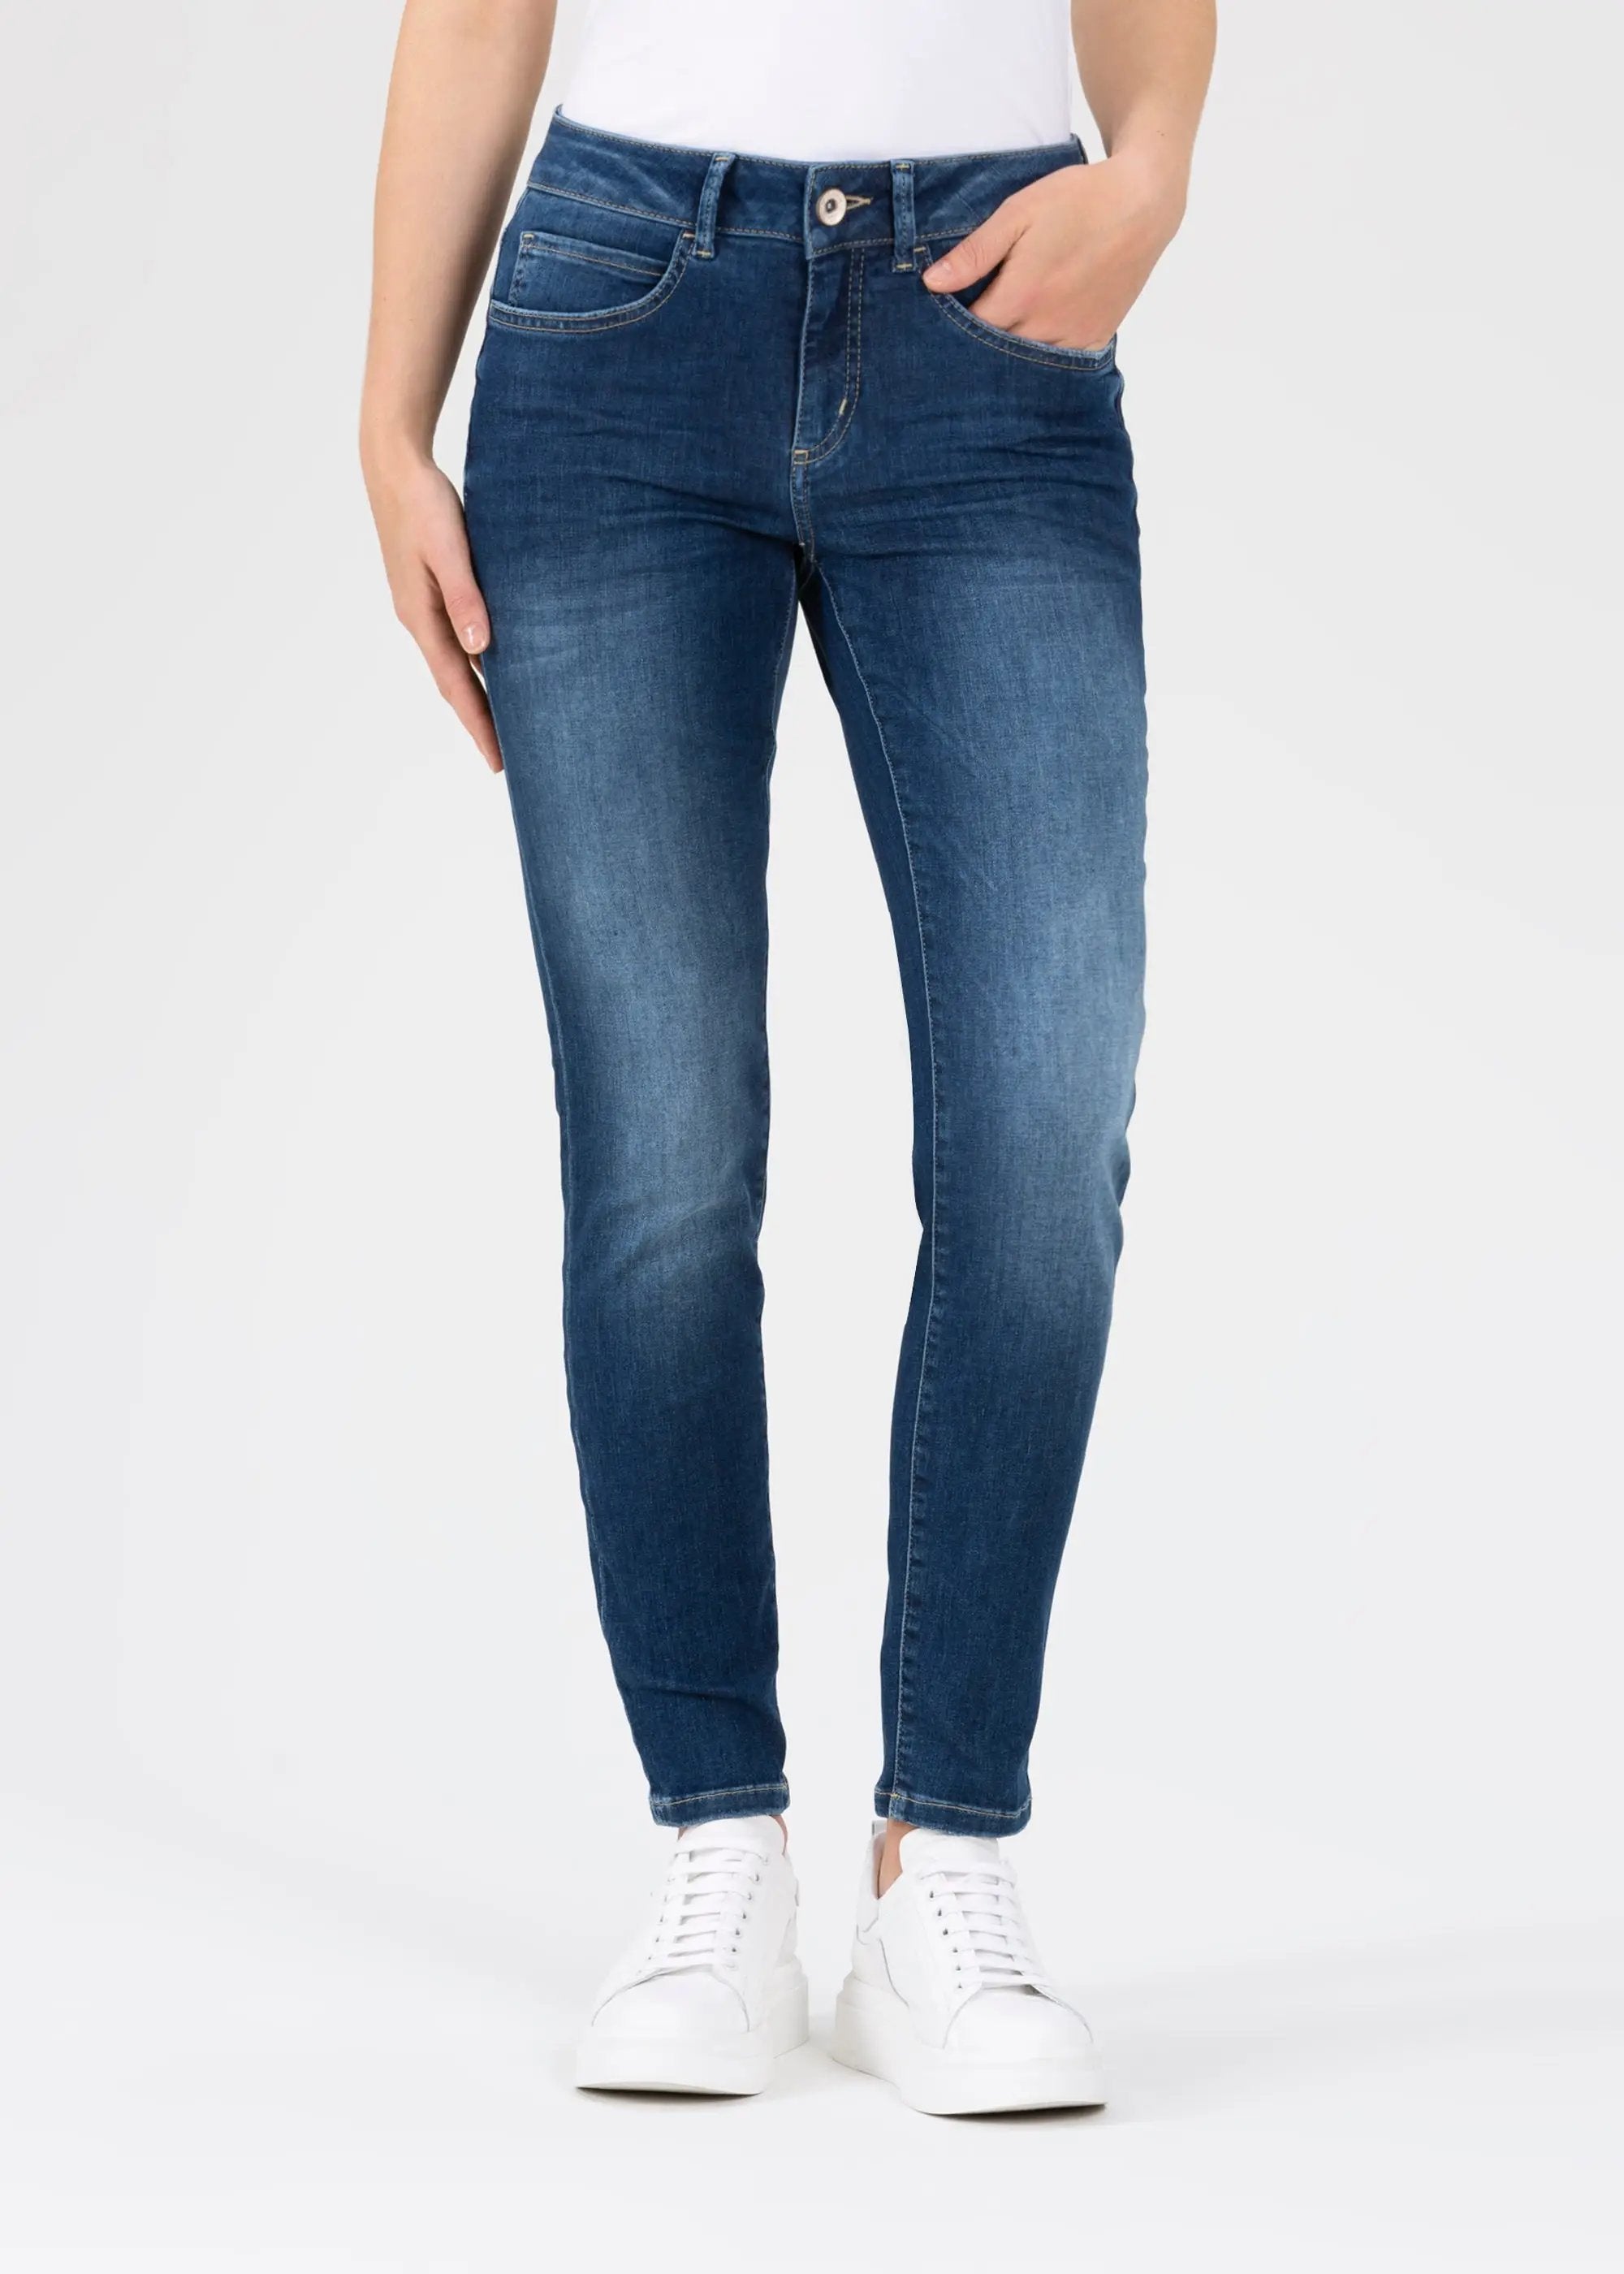 Peggy in jeans blue Slim-fit